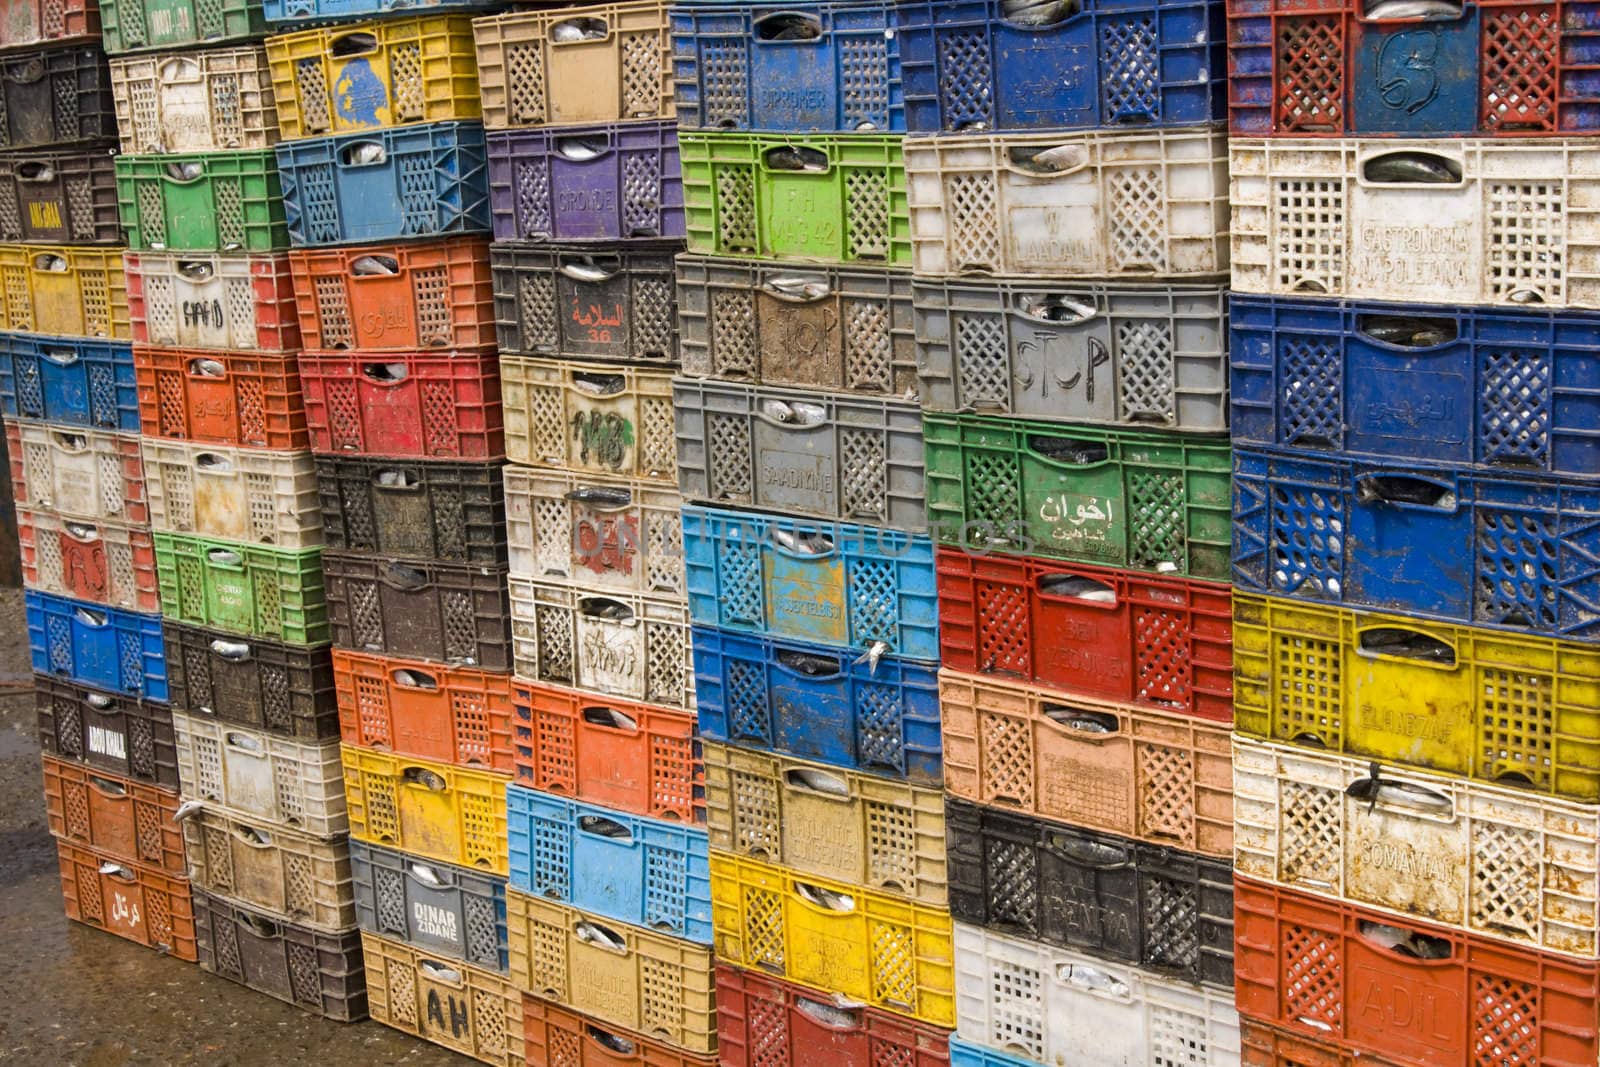 Stack of colorful packing cases containing recently landed fish in the fishing village of Essaouira, Morocco.